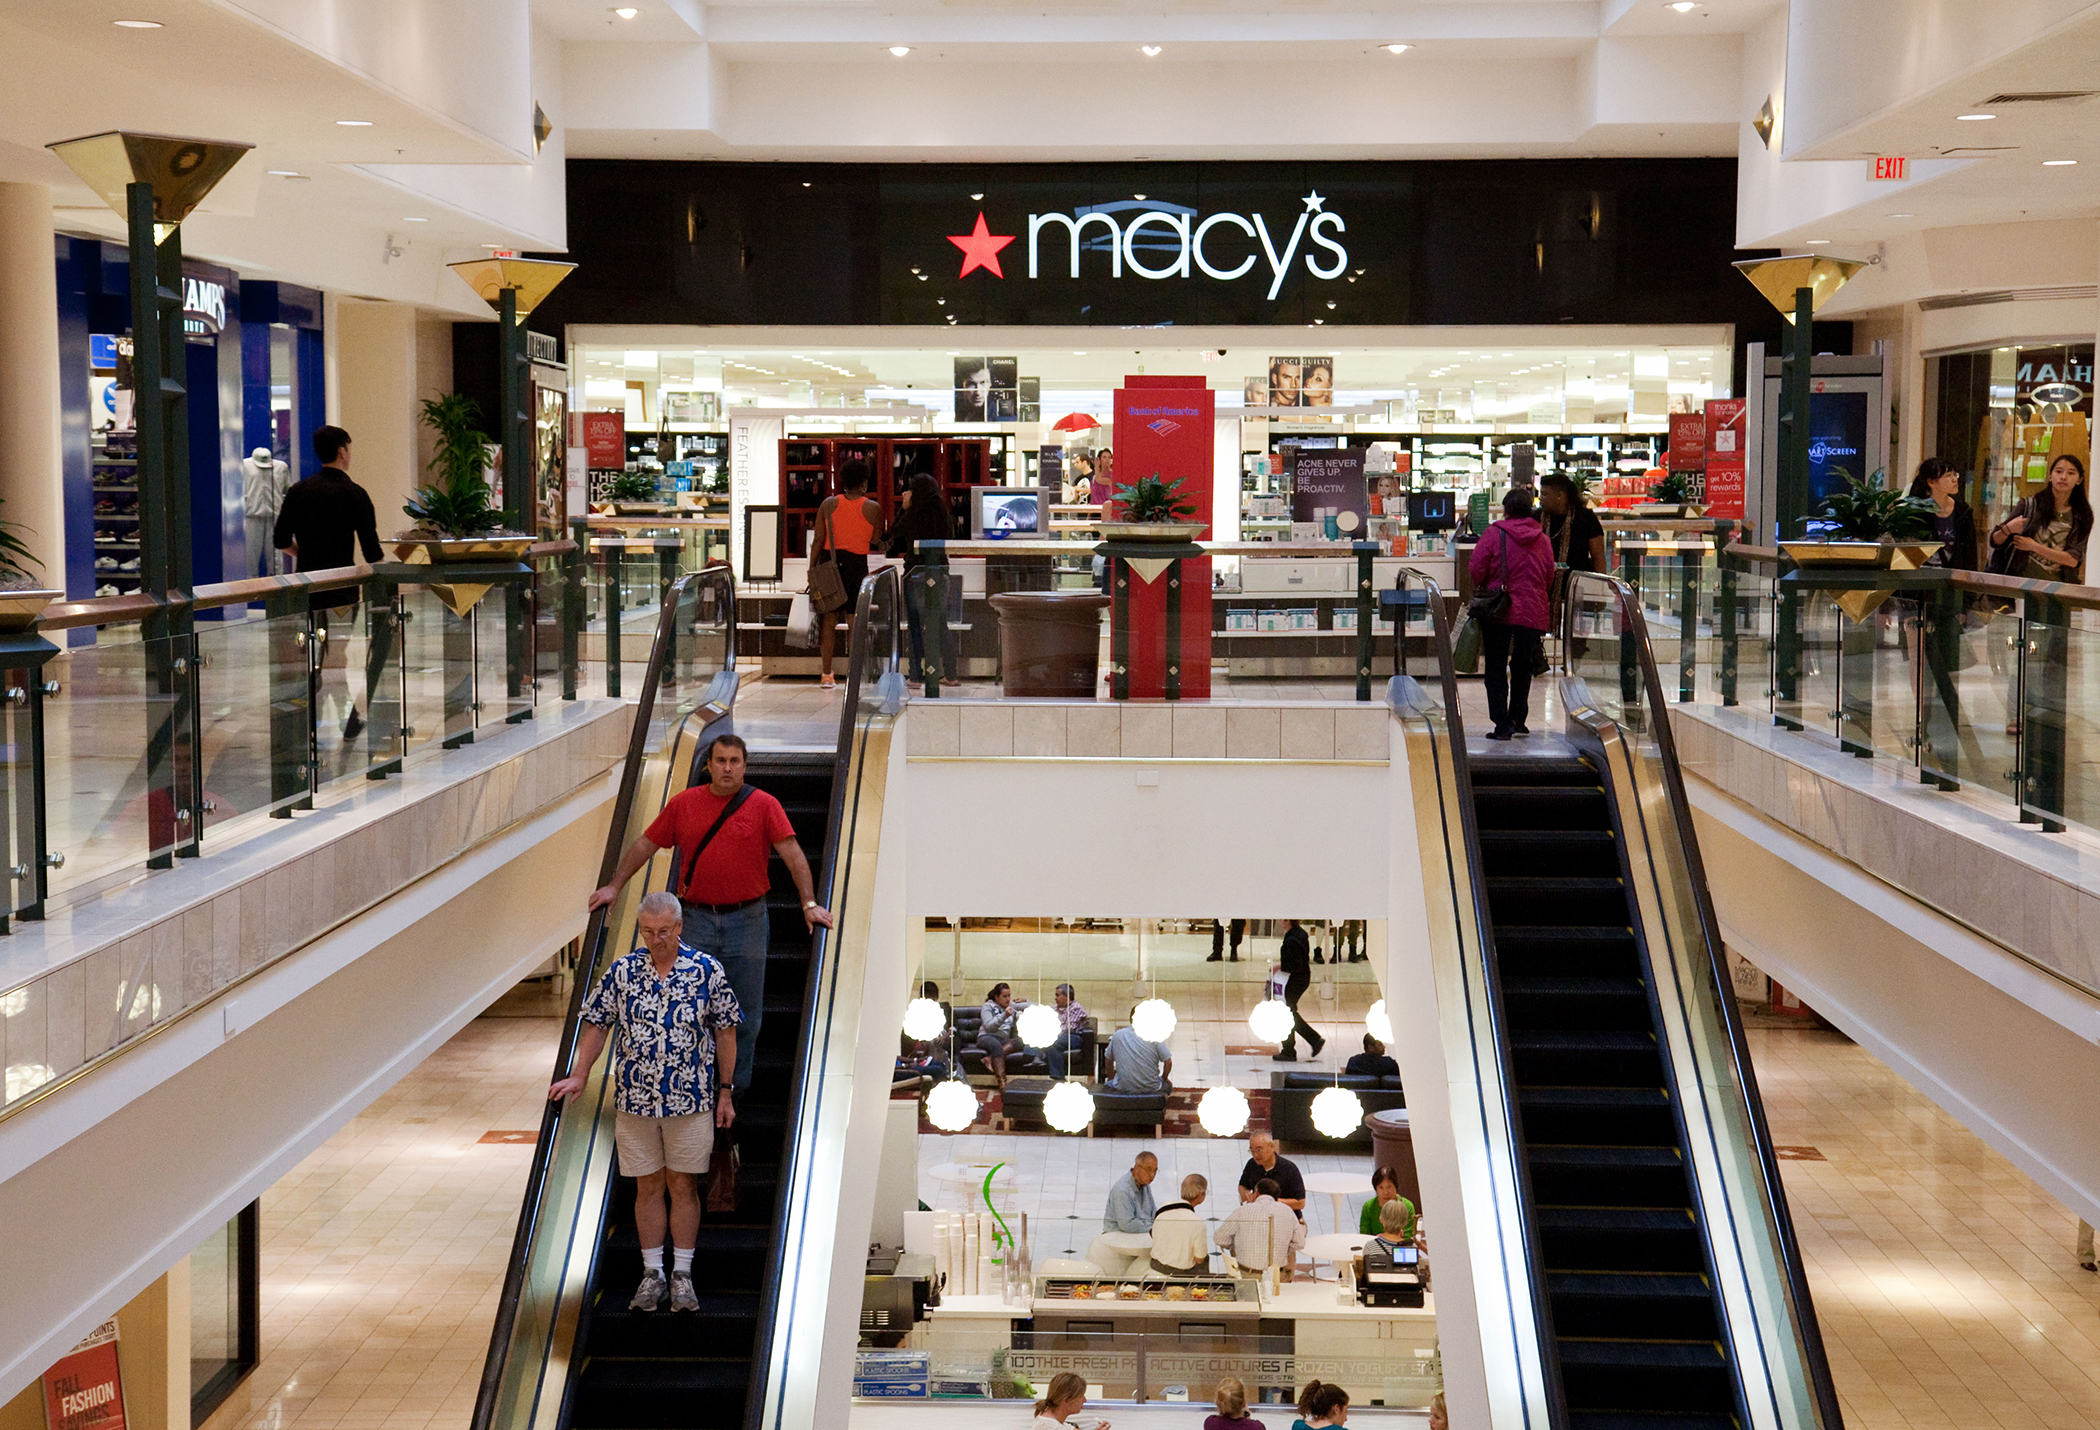 macy's returned mattresses at woodfield store